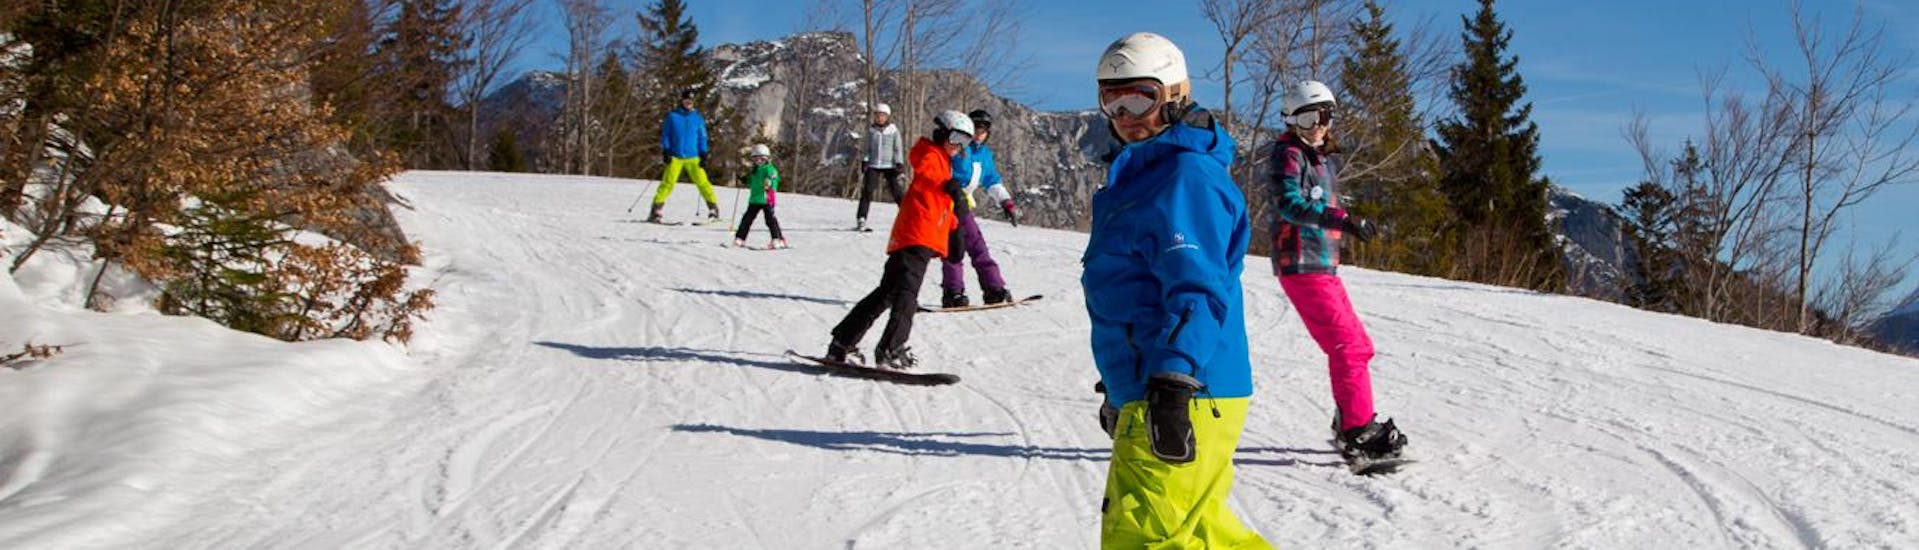 Kids Snowboarding Lessons (6-15 y.) for Advanced Boarders.